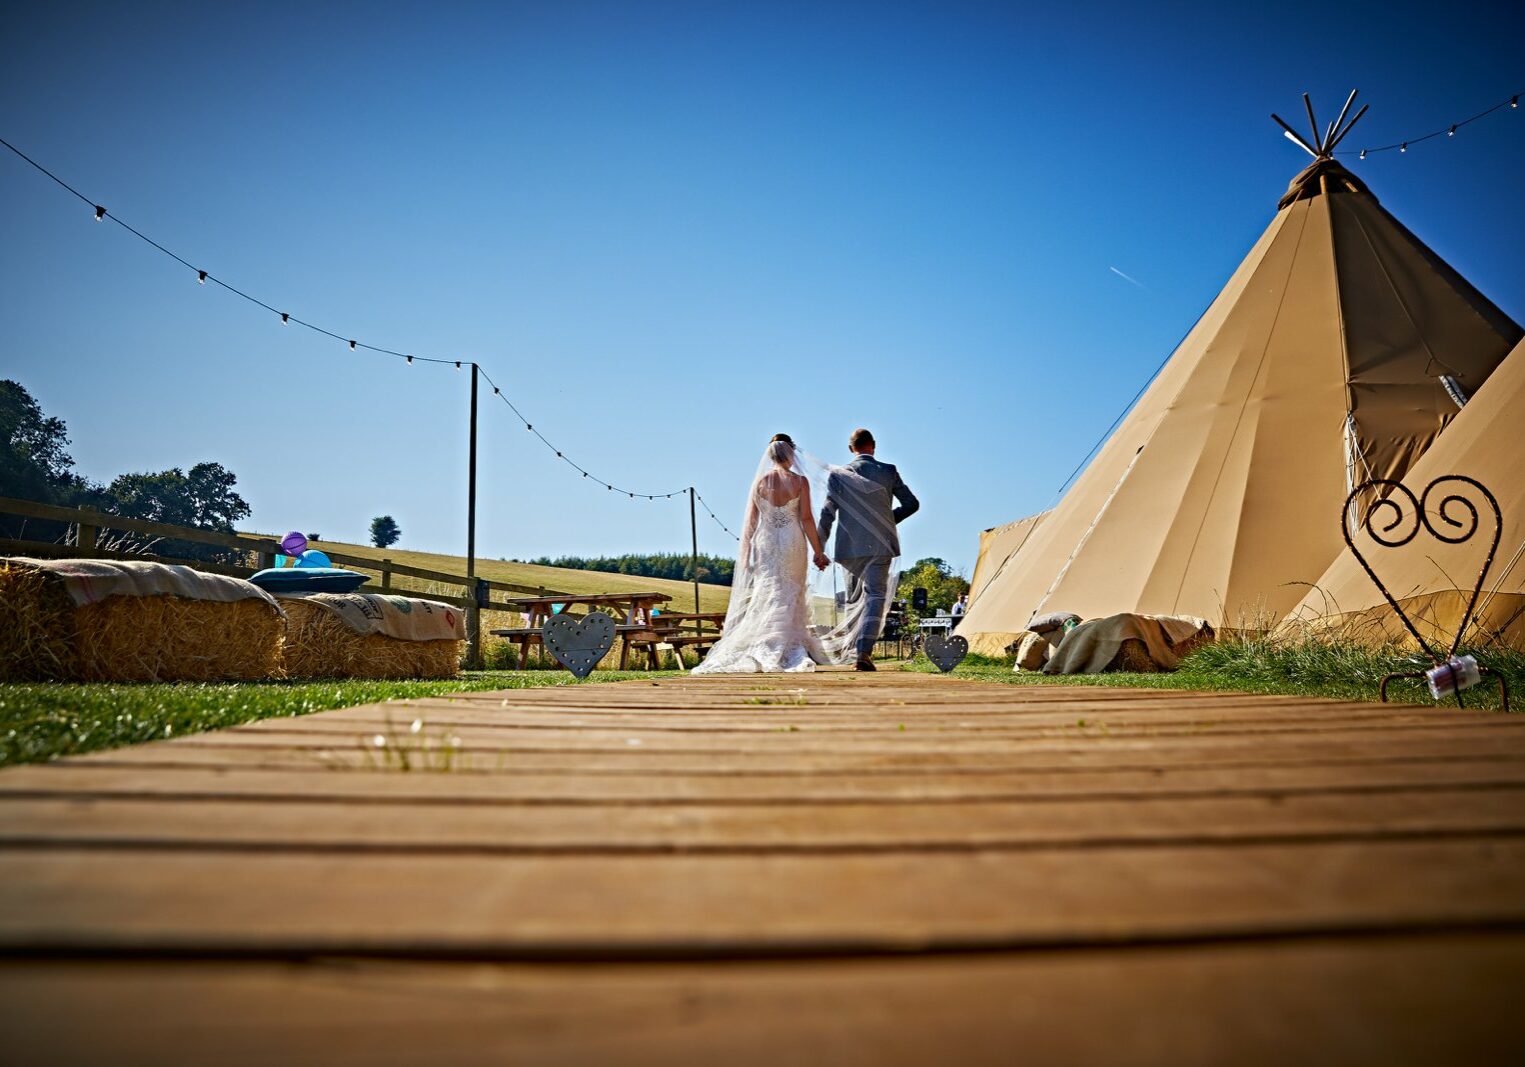 Bridal couple walking by a teepee